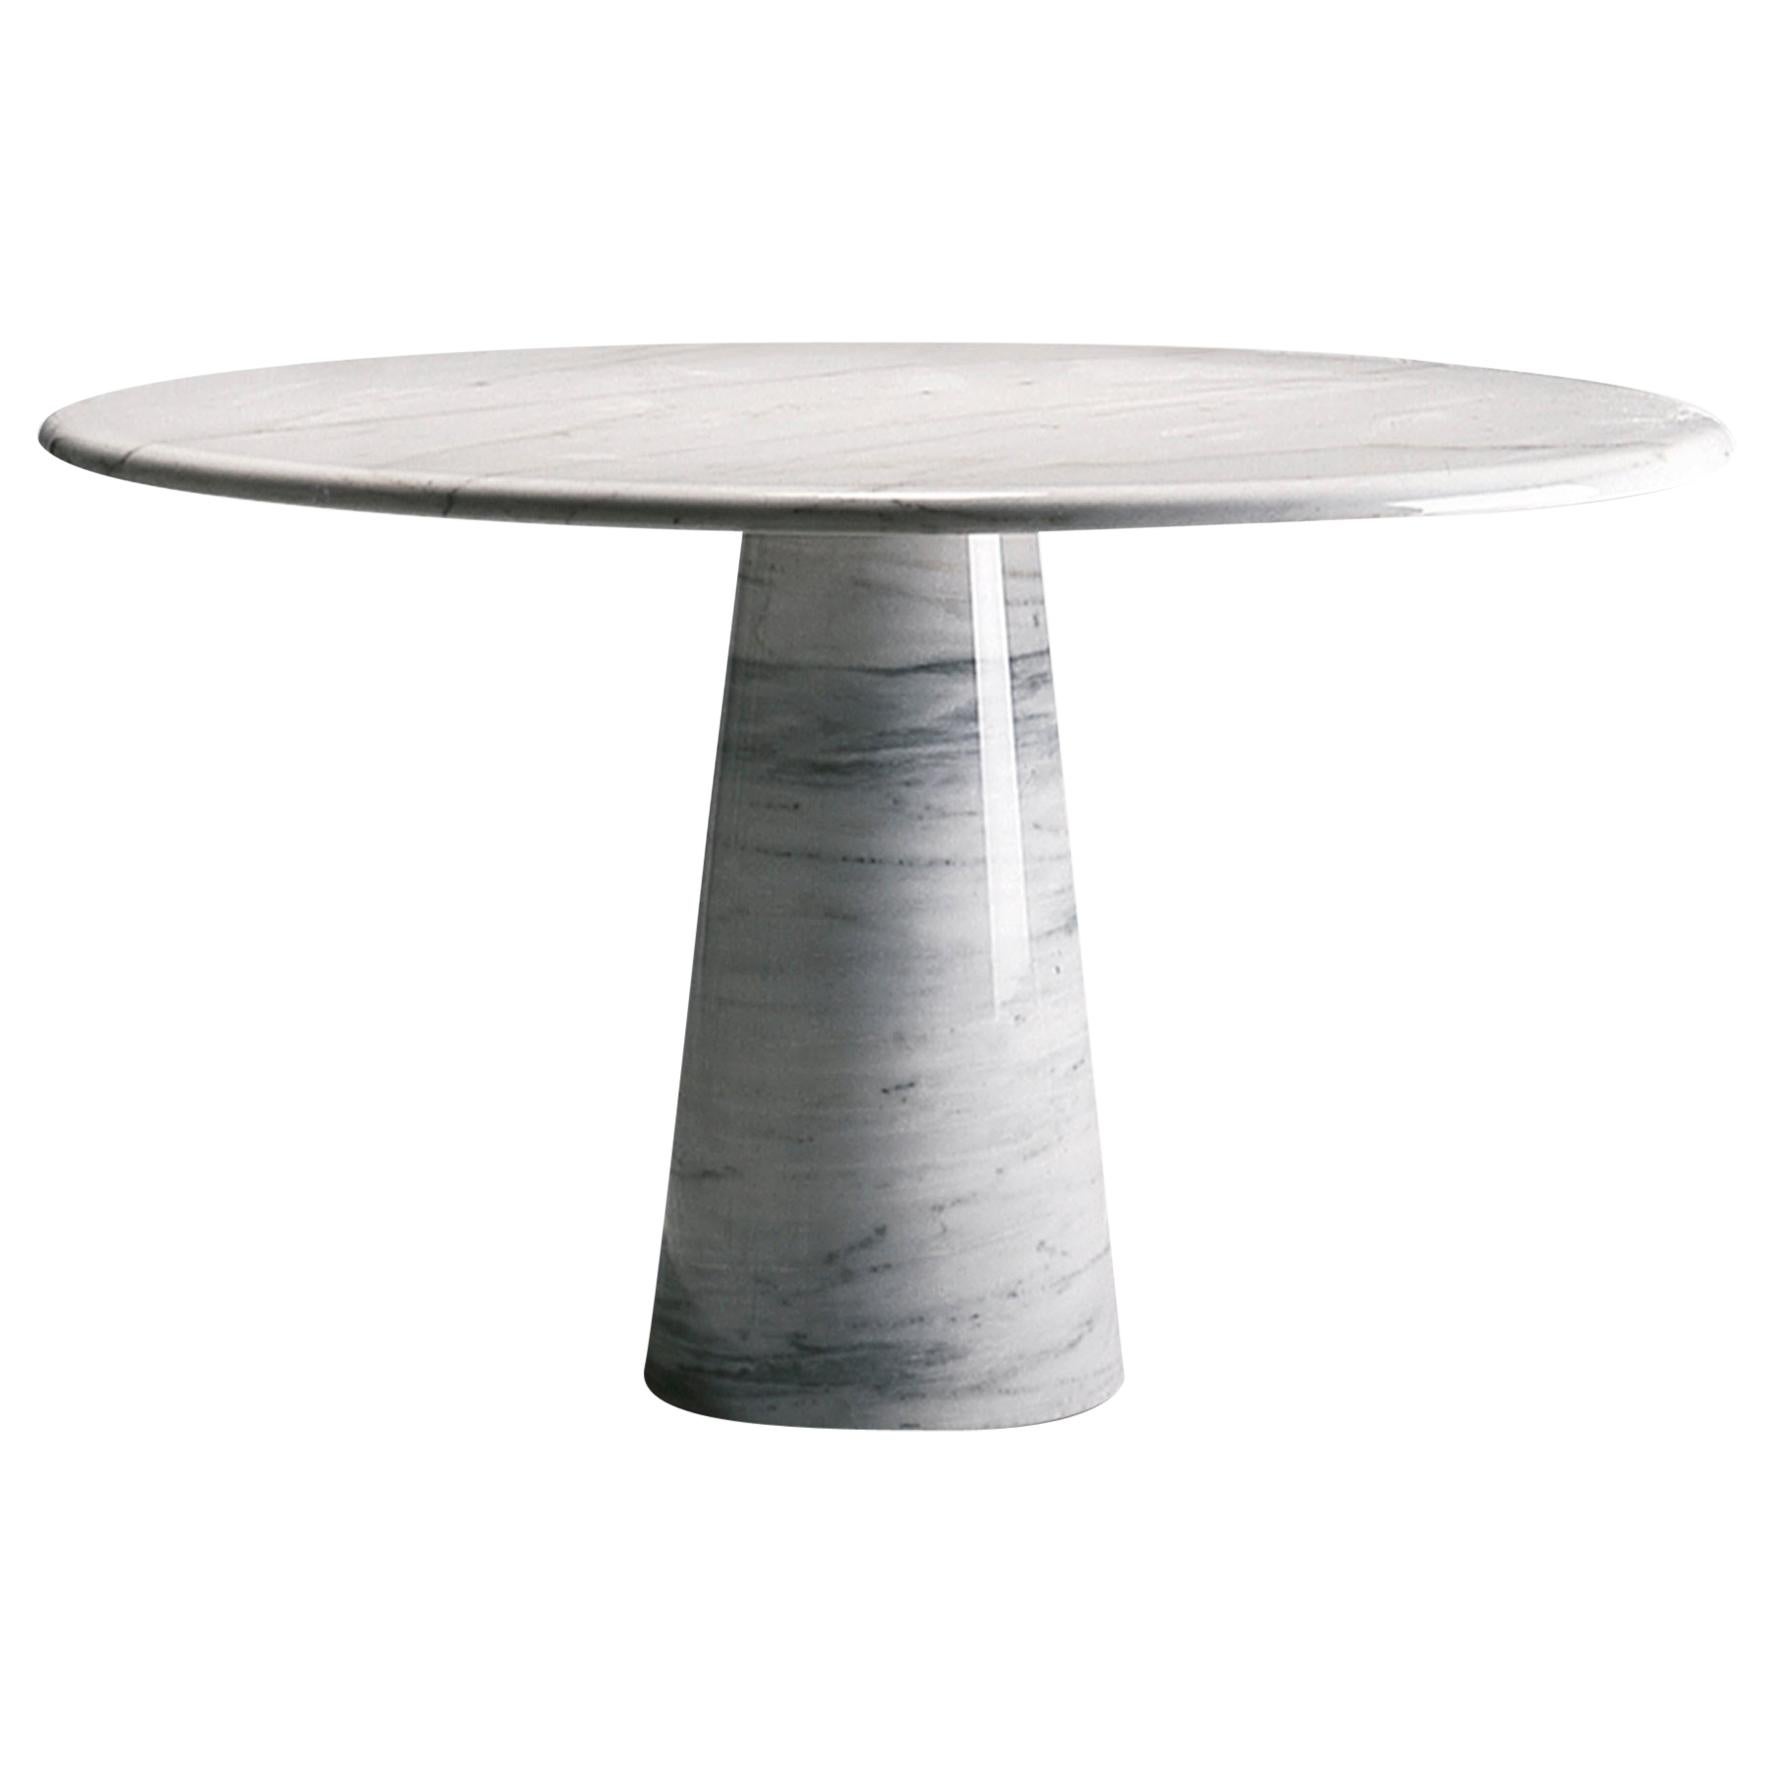 'Colonnata' Round Dining Table D130cm, Travertine, BPS, and More For Sale